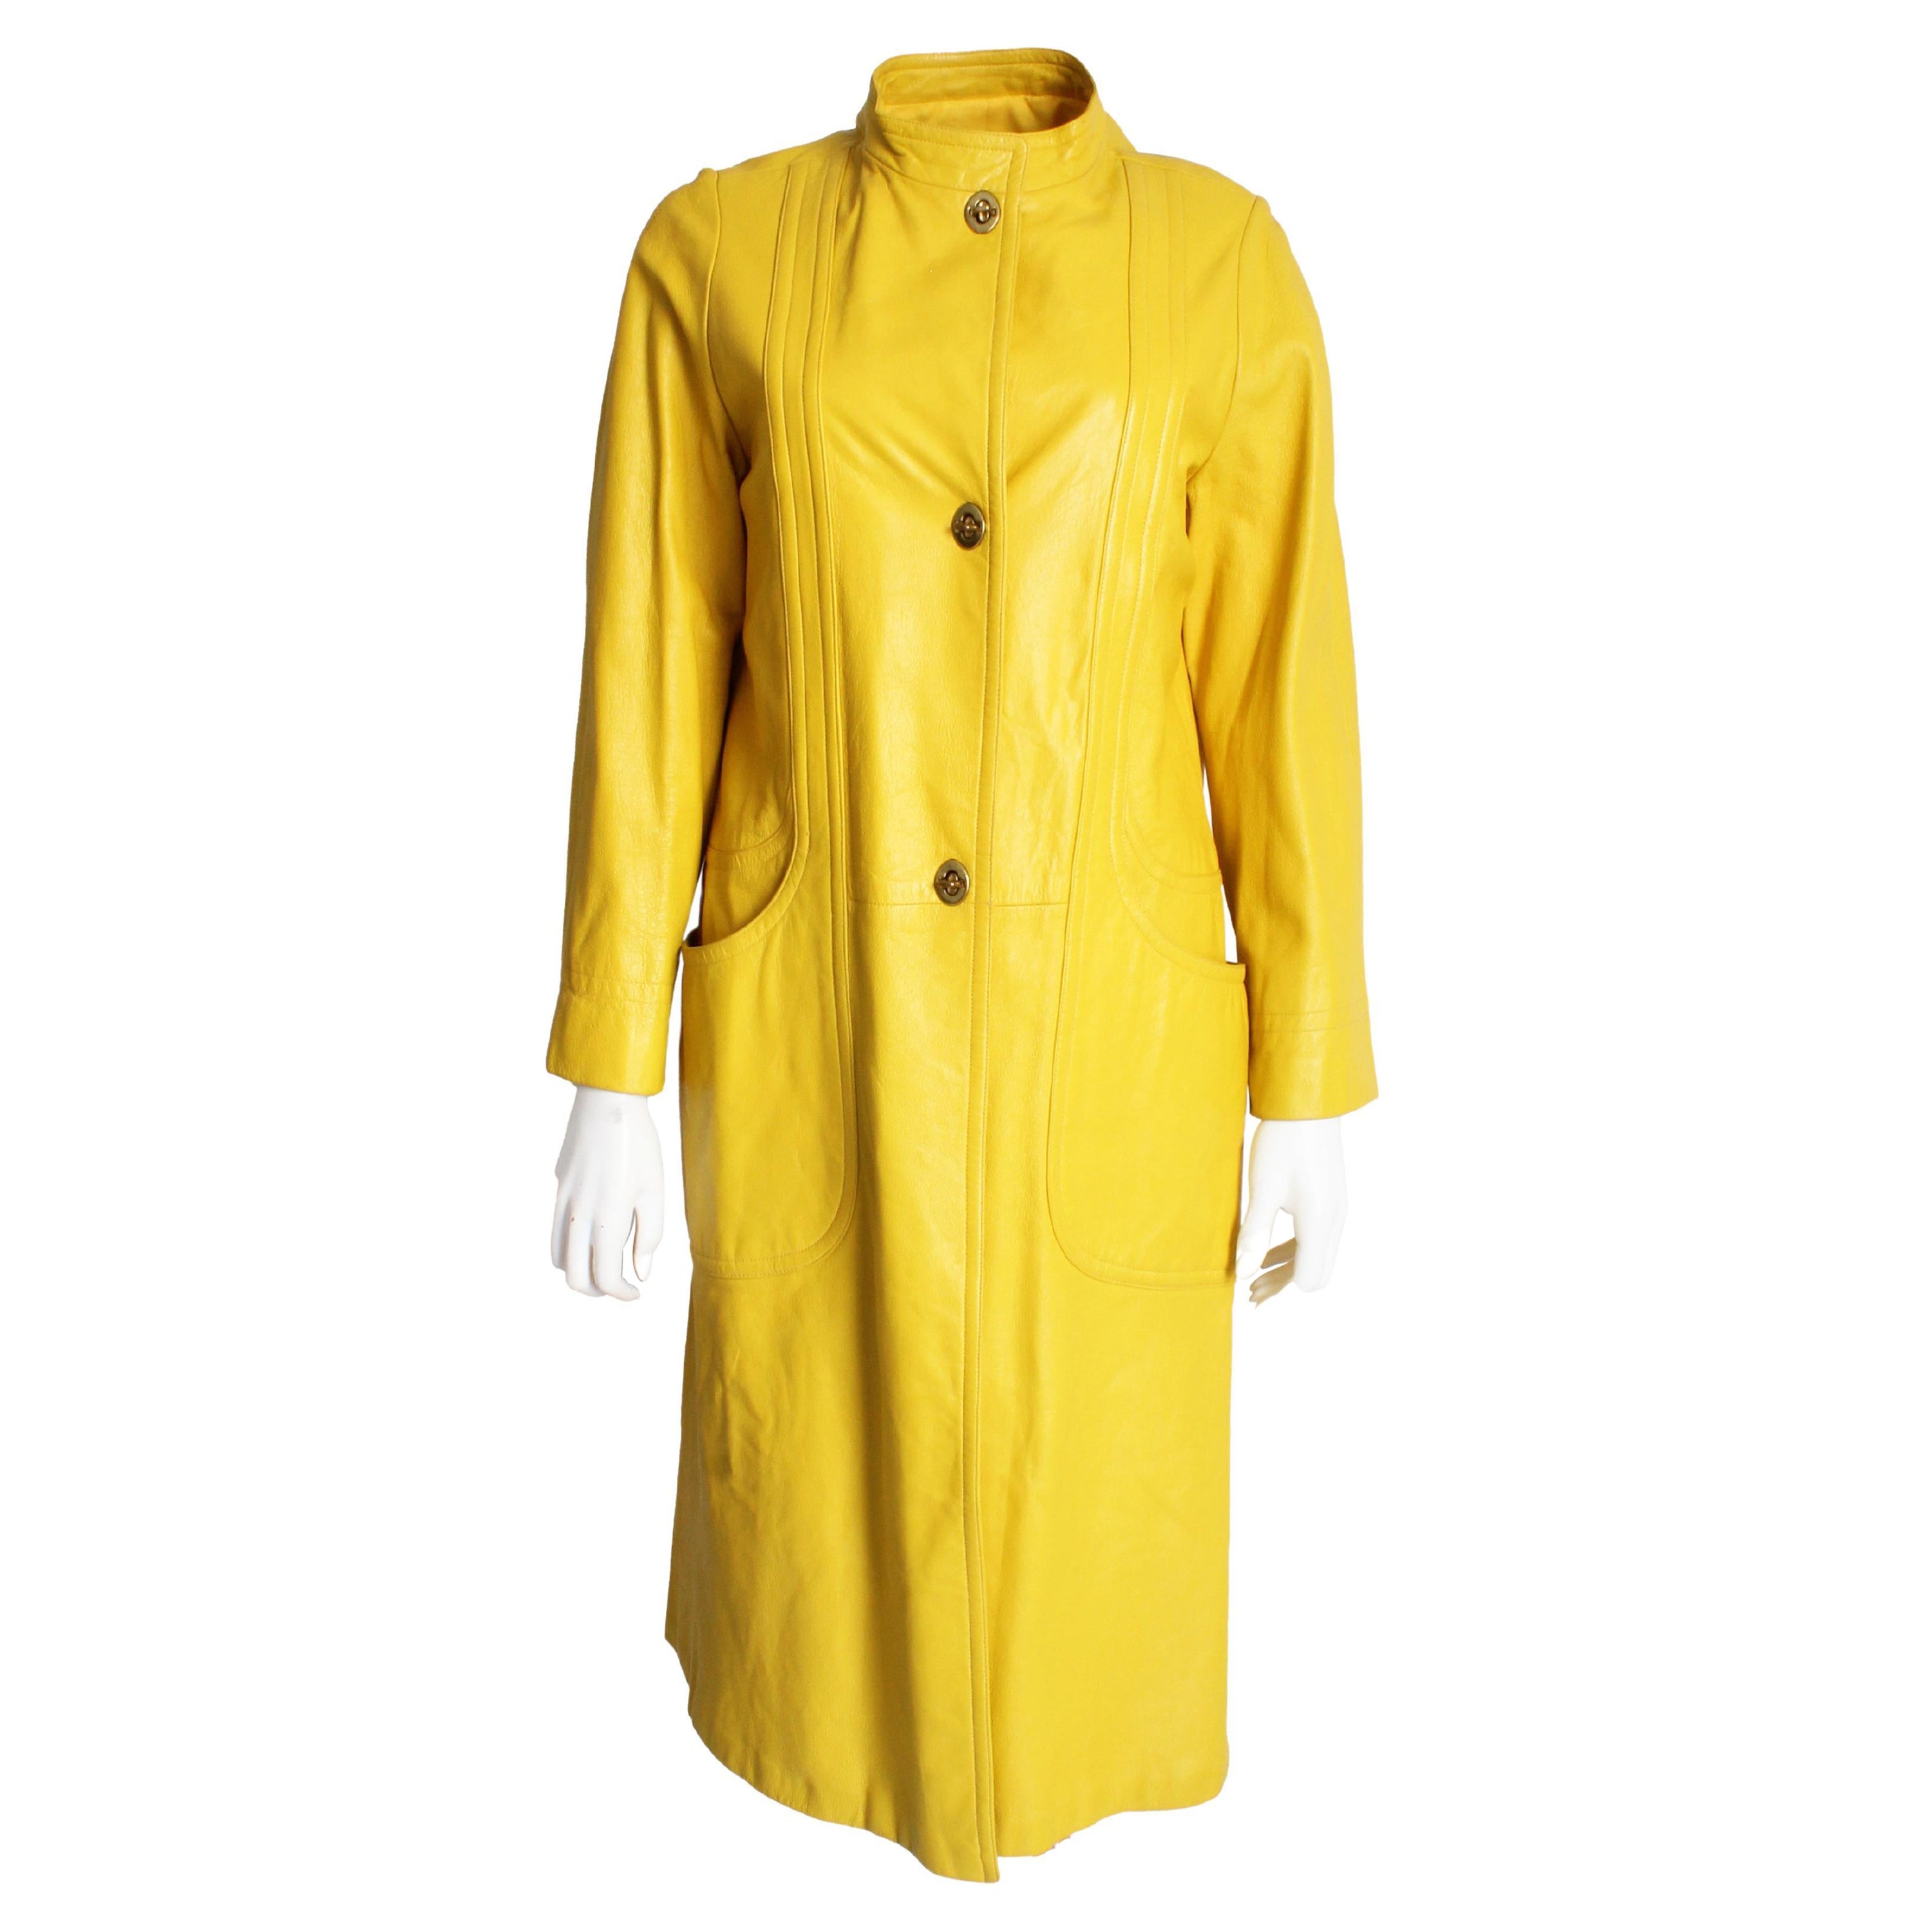 Bonnie Cashin for Sills Coat Long Leather Jacket Bright Yellow Mod Vintage 60s  For Sale